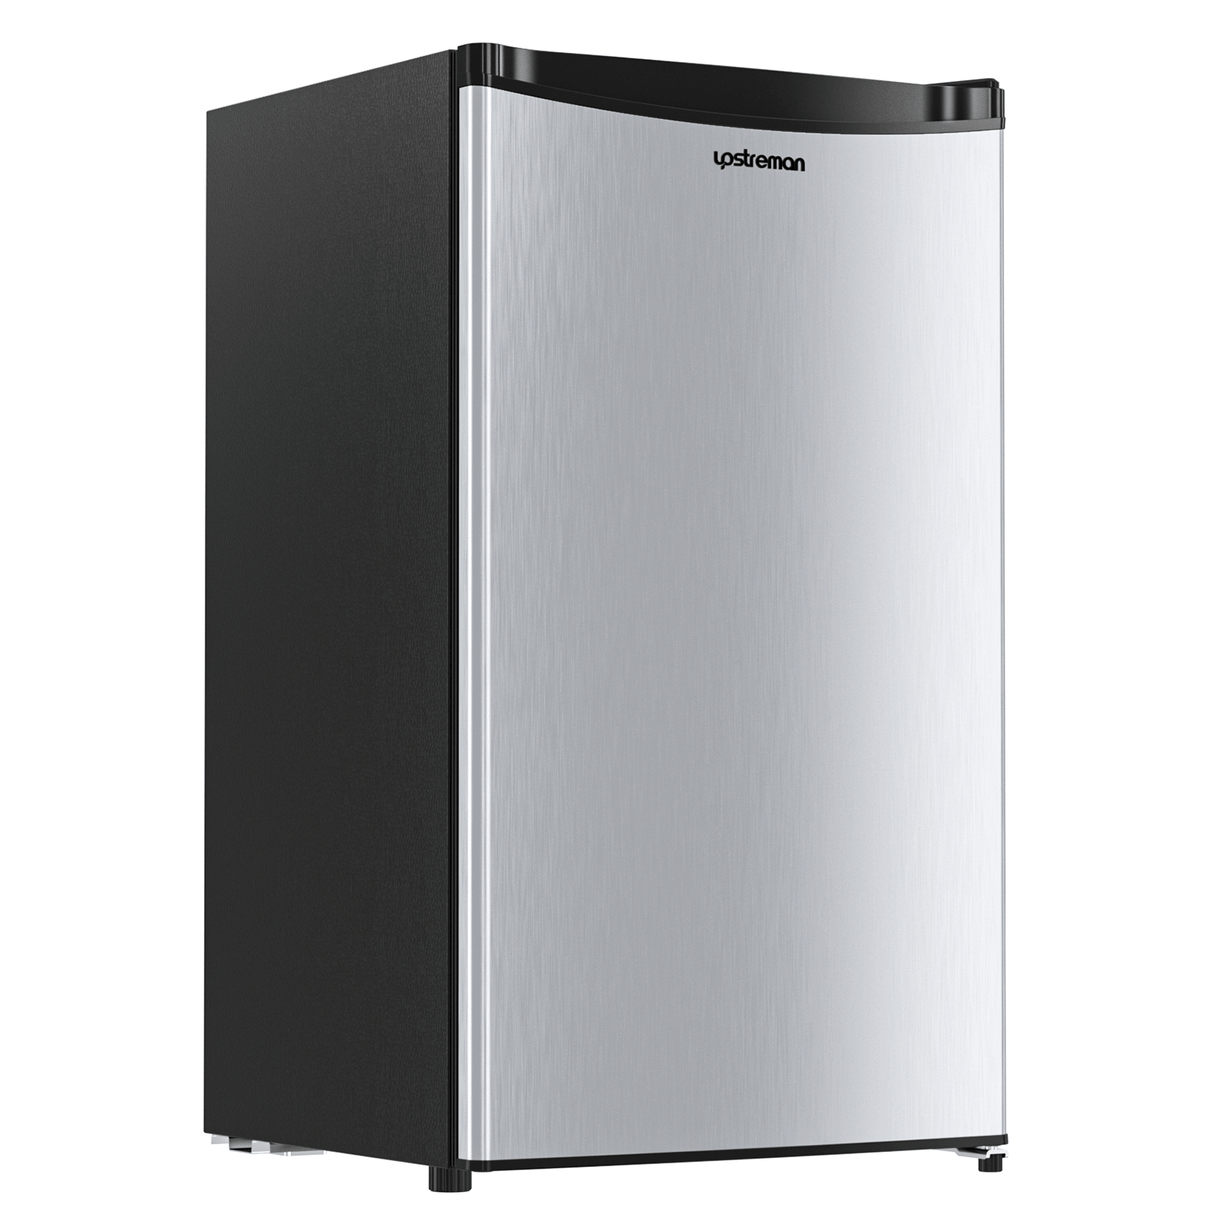 LUCKYERMORE 3.2 Cu.Ft Mini Refrigerator With Freezer 2 Door Fridge Compact  Adjustable Thermostat Control Removable For Apartment Office